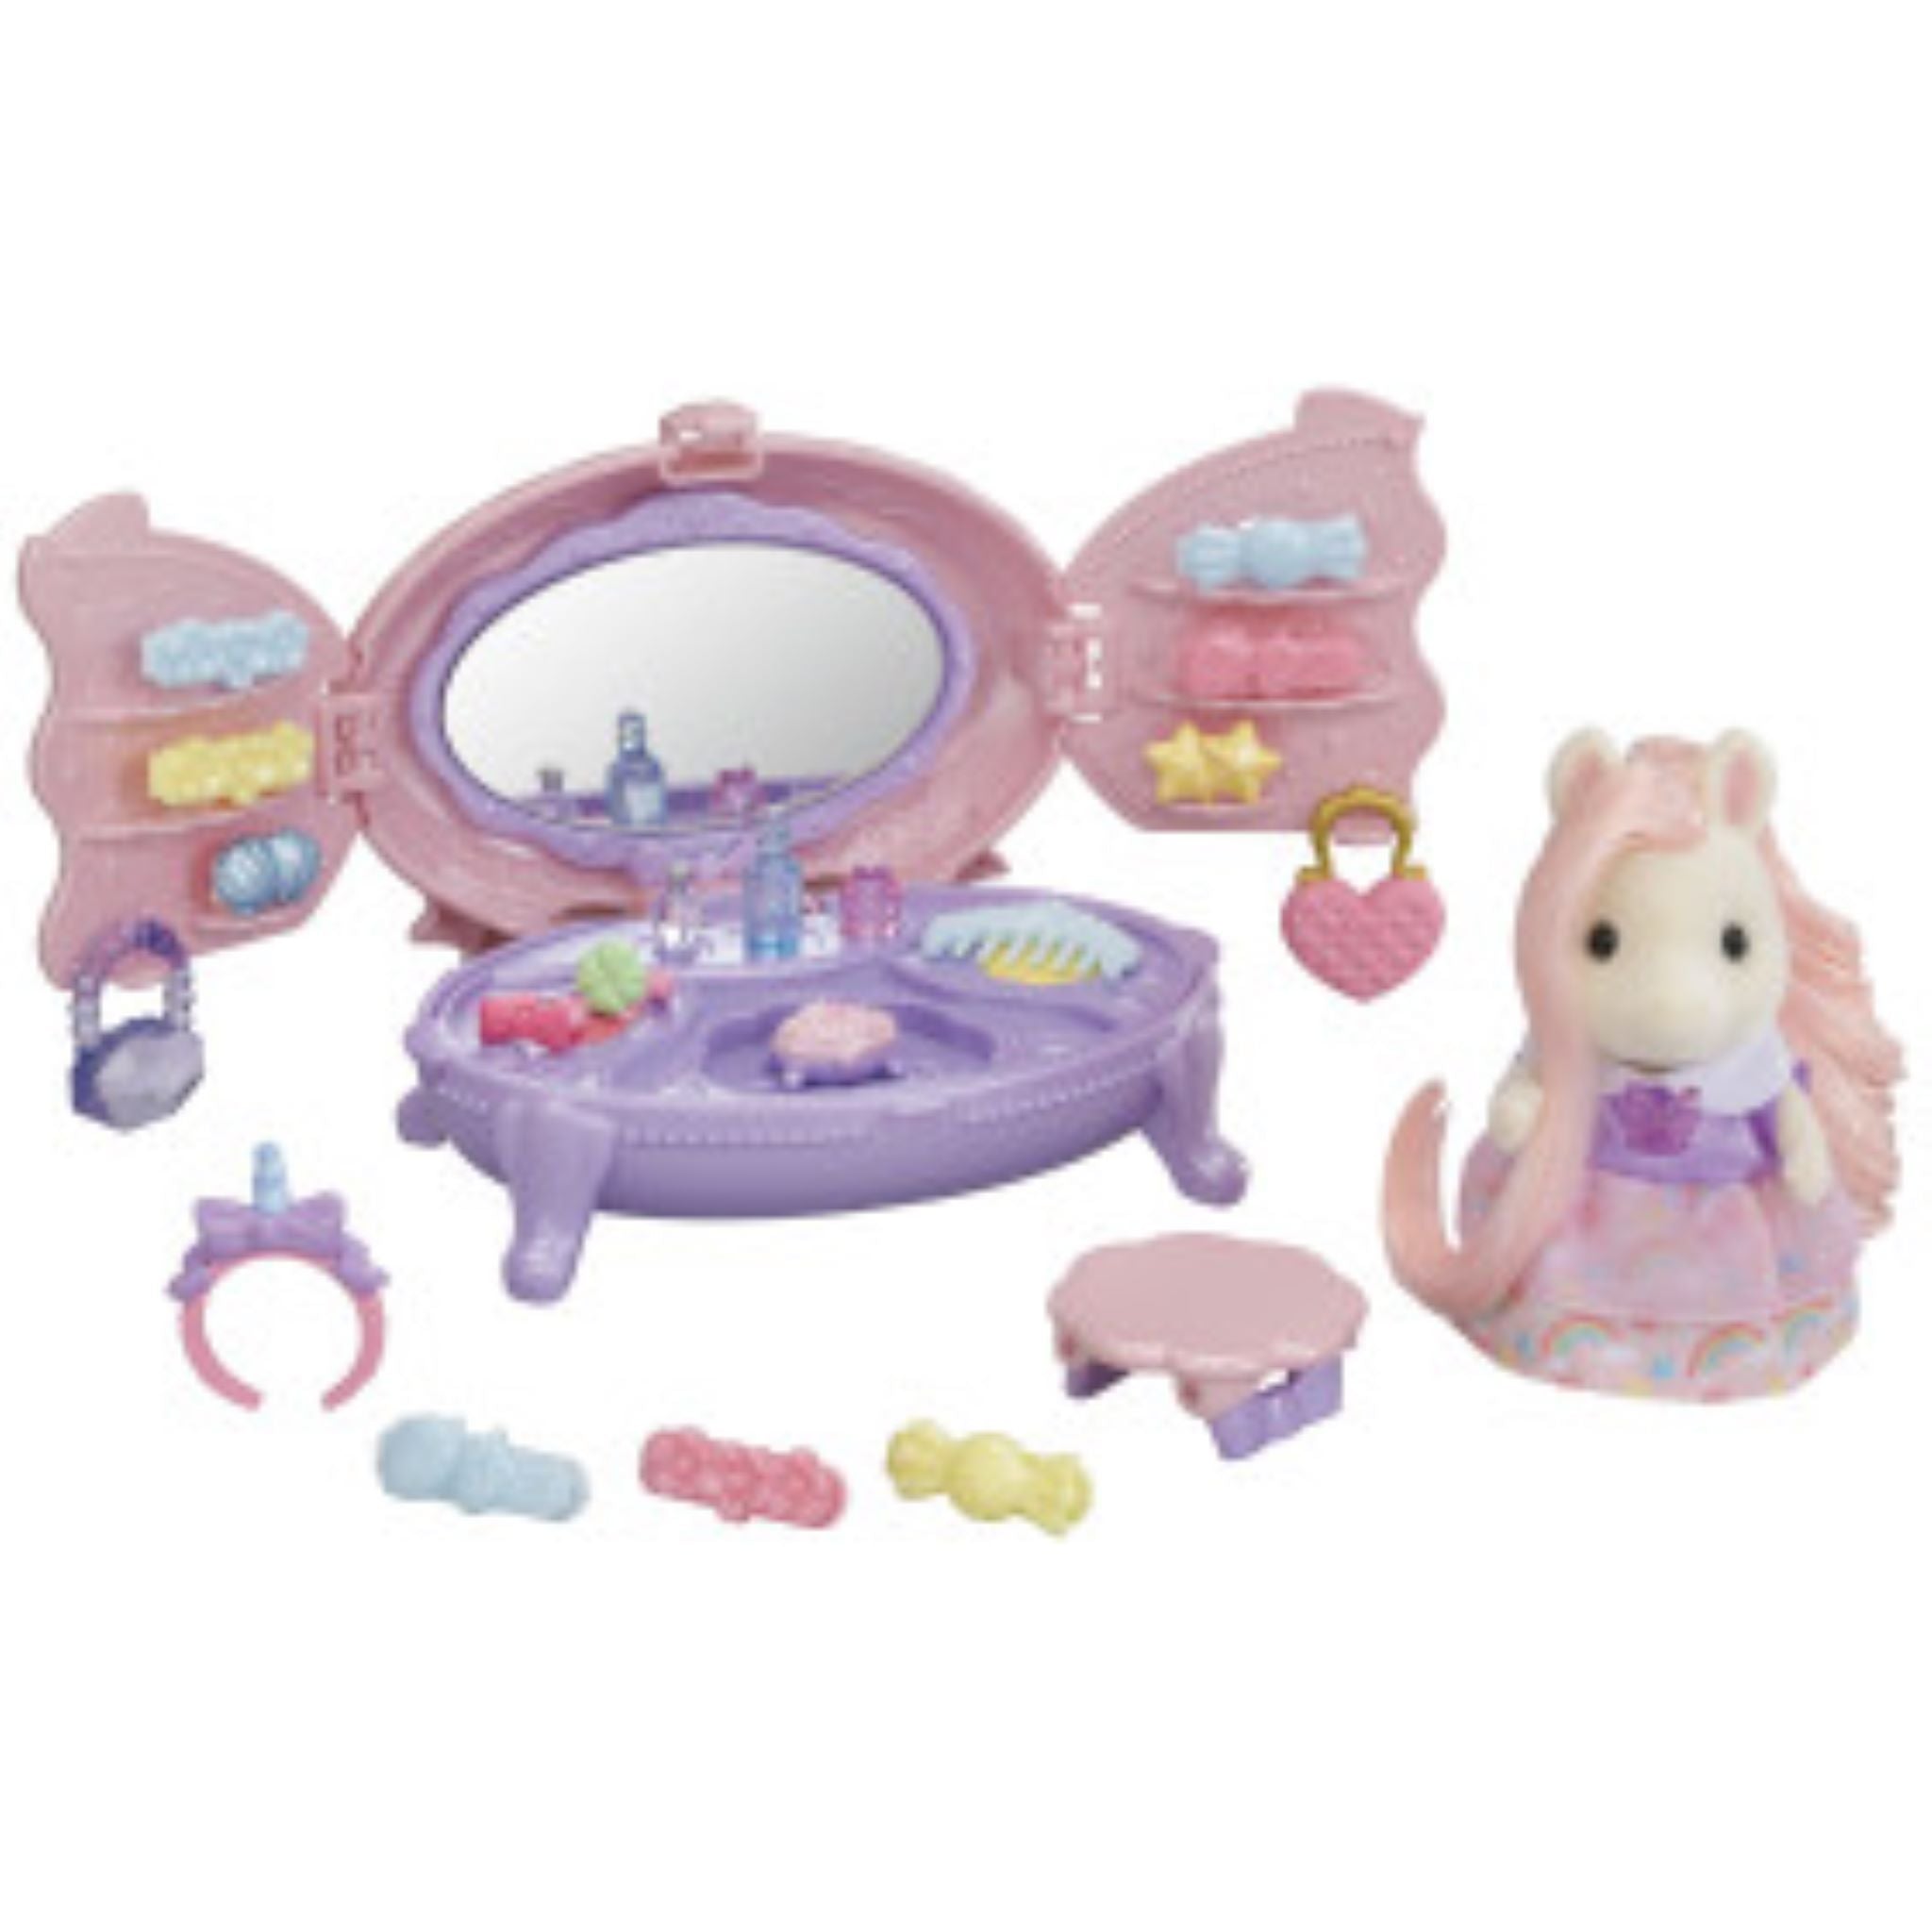 Calico Critters Baby Collectables – Fairytale – Awesome Toys Gifts